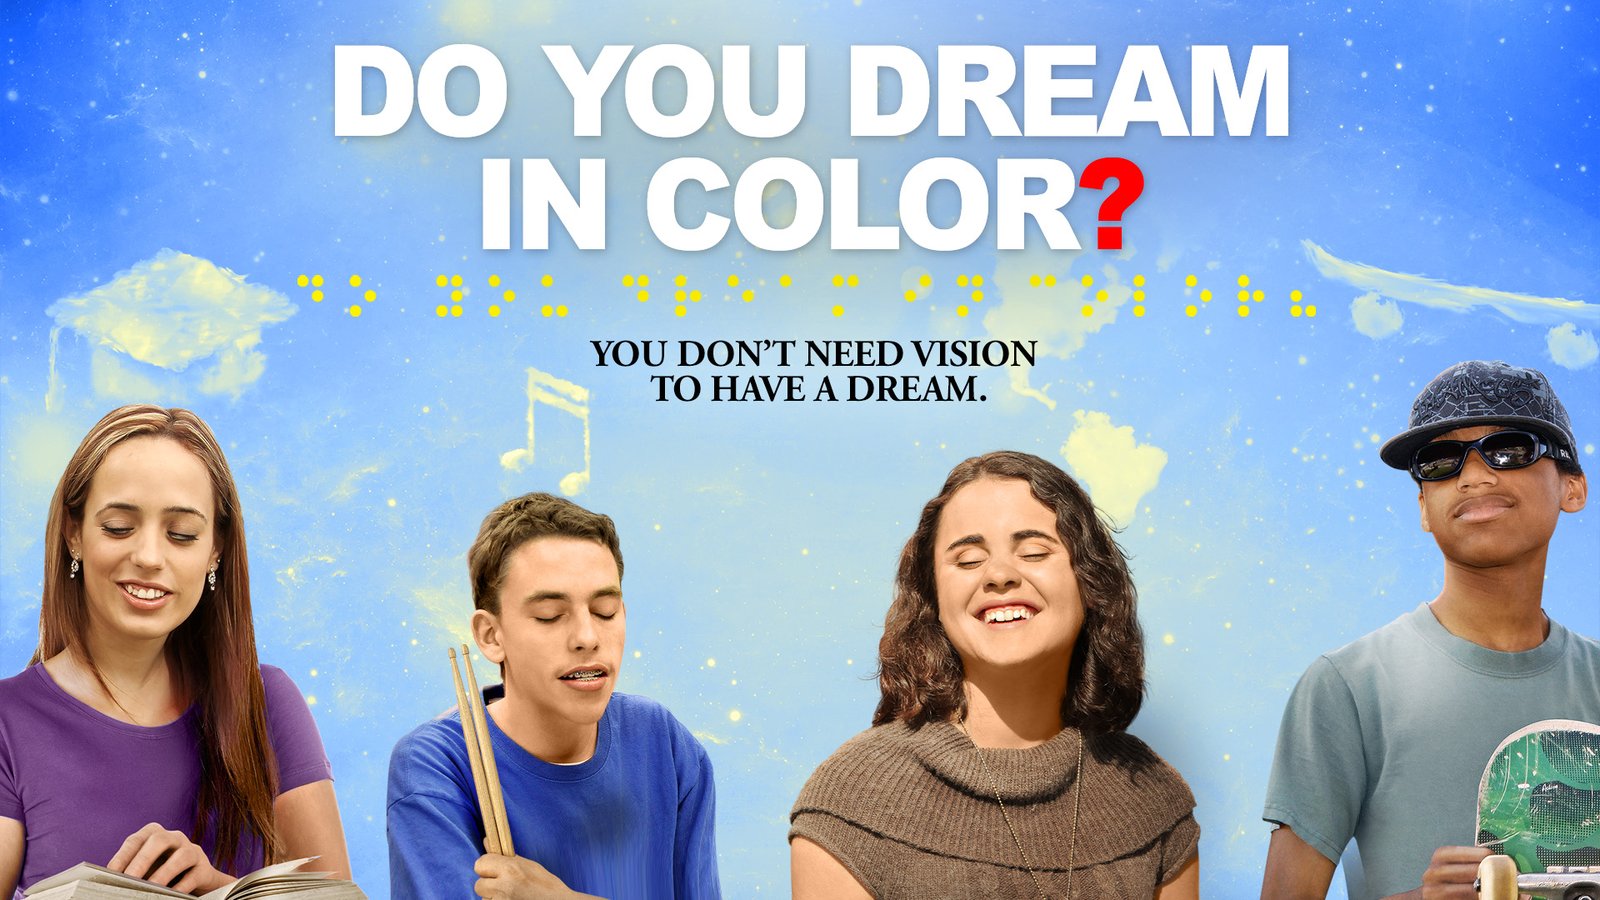 Do You Dream in Color? - The Dreams and Aspirations of Four Blind Teenagers